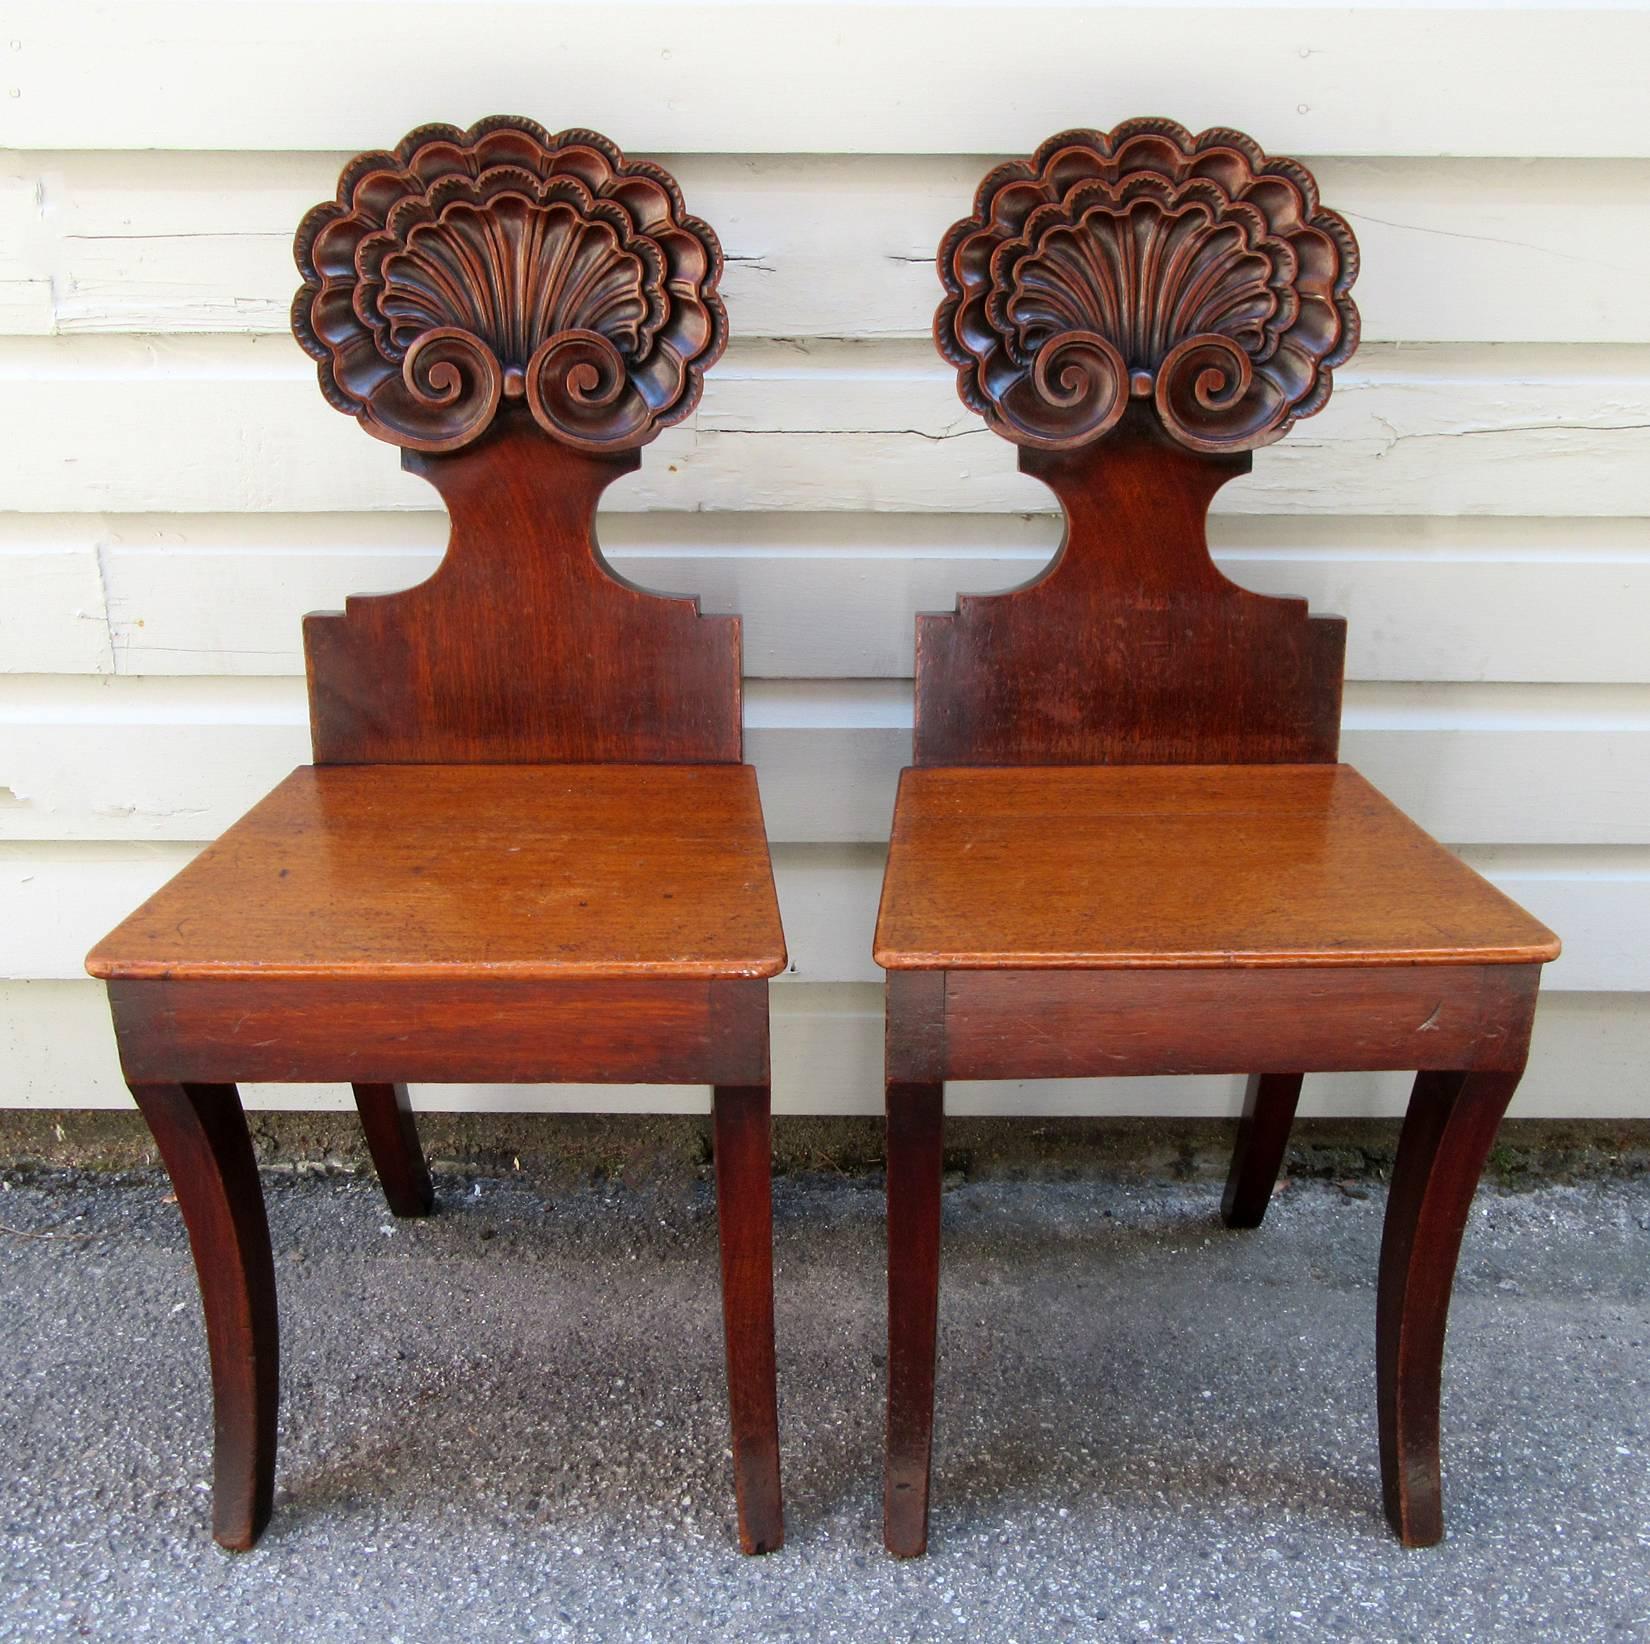 Early 19th Century English William IV Mahogany Hall Chairs Attributed to Gillows 4